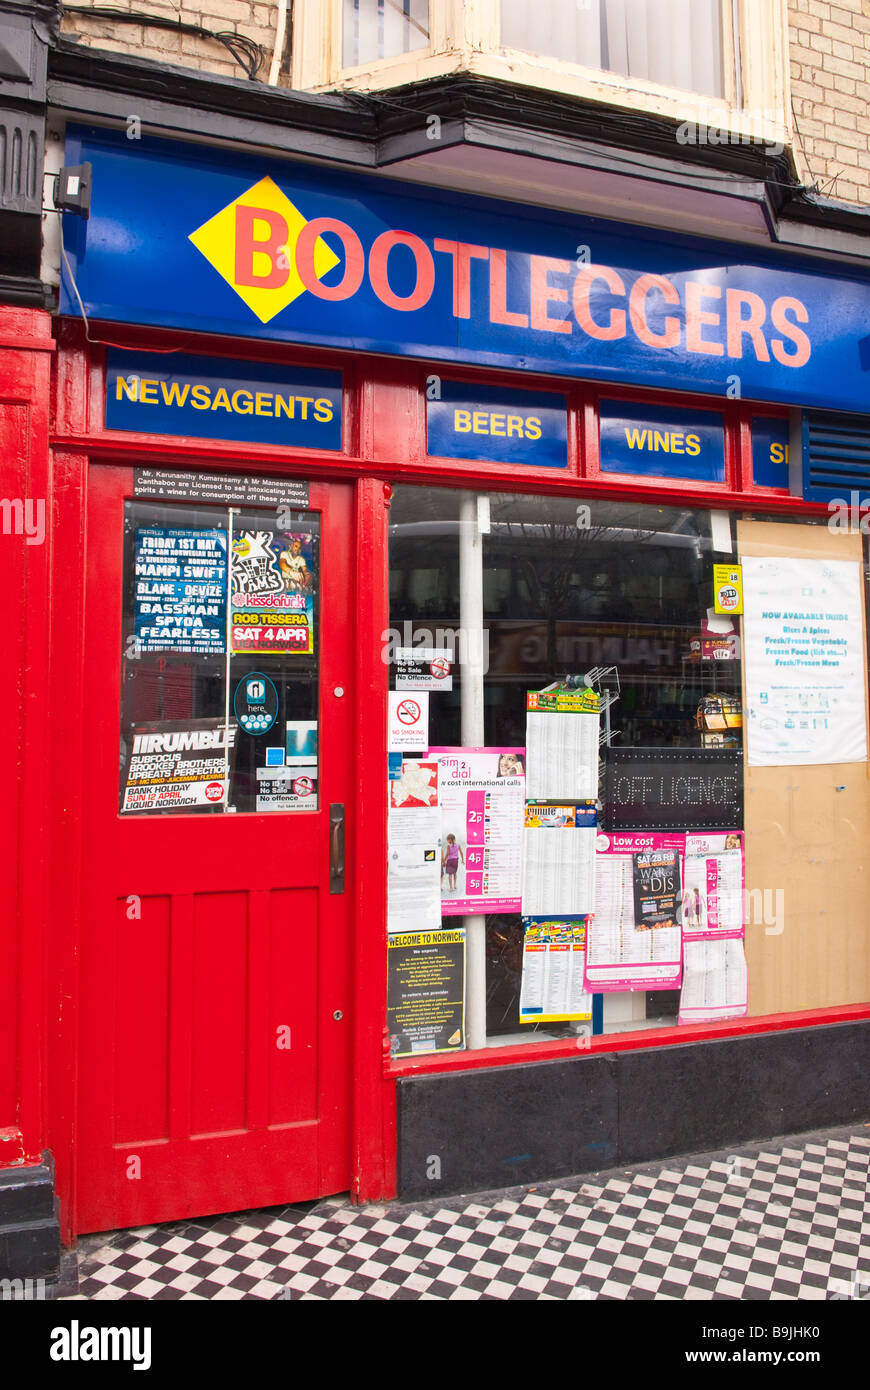 Bootleggers shop store and off licence in Norwich,Norfolk,Uk Stock Photo